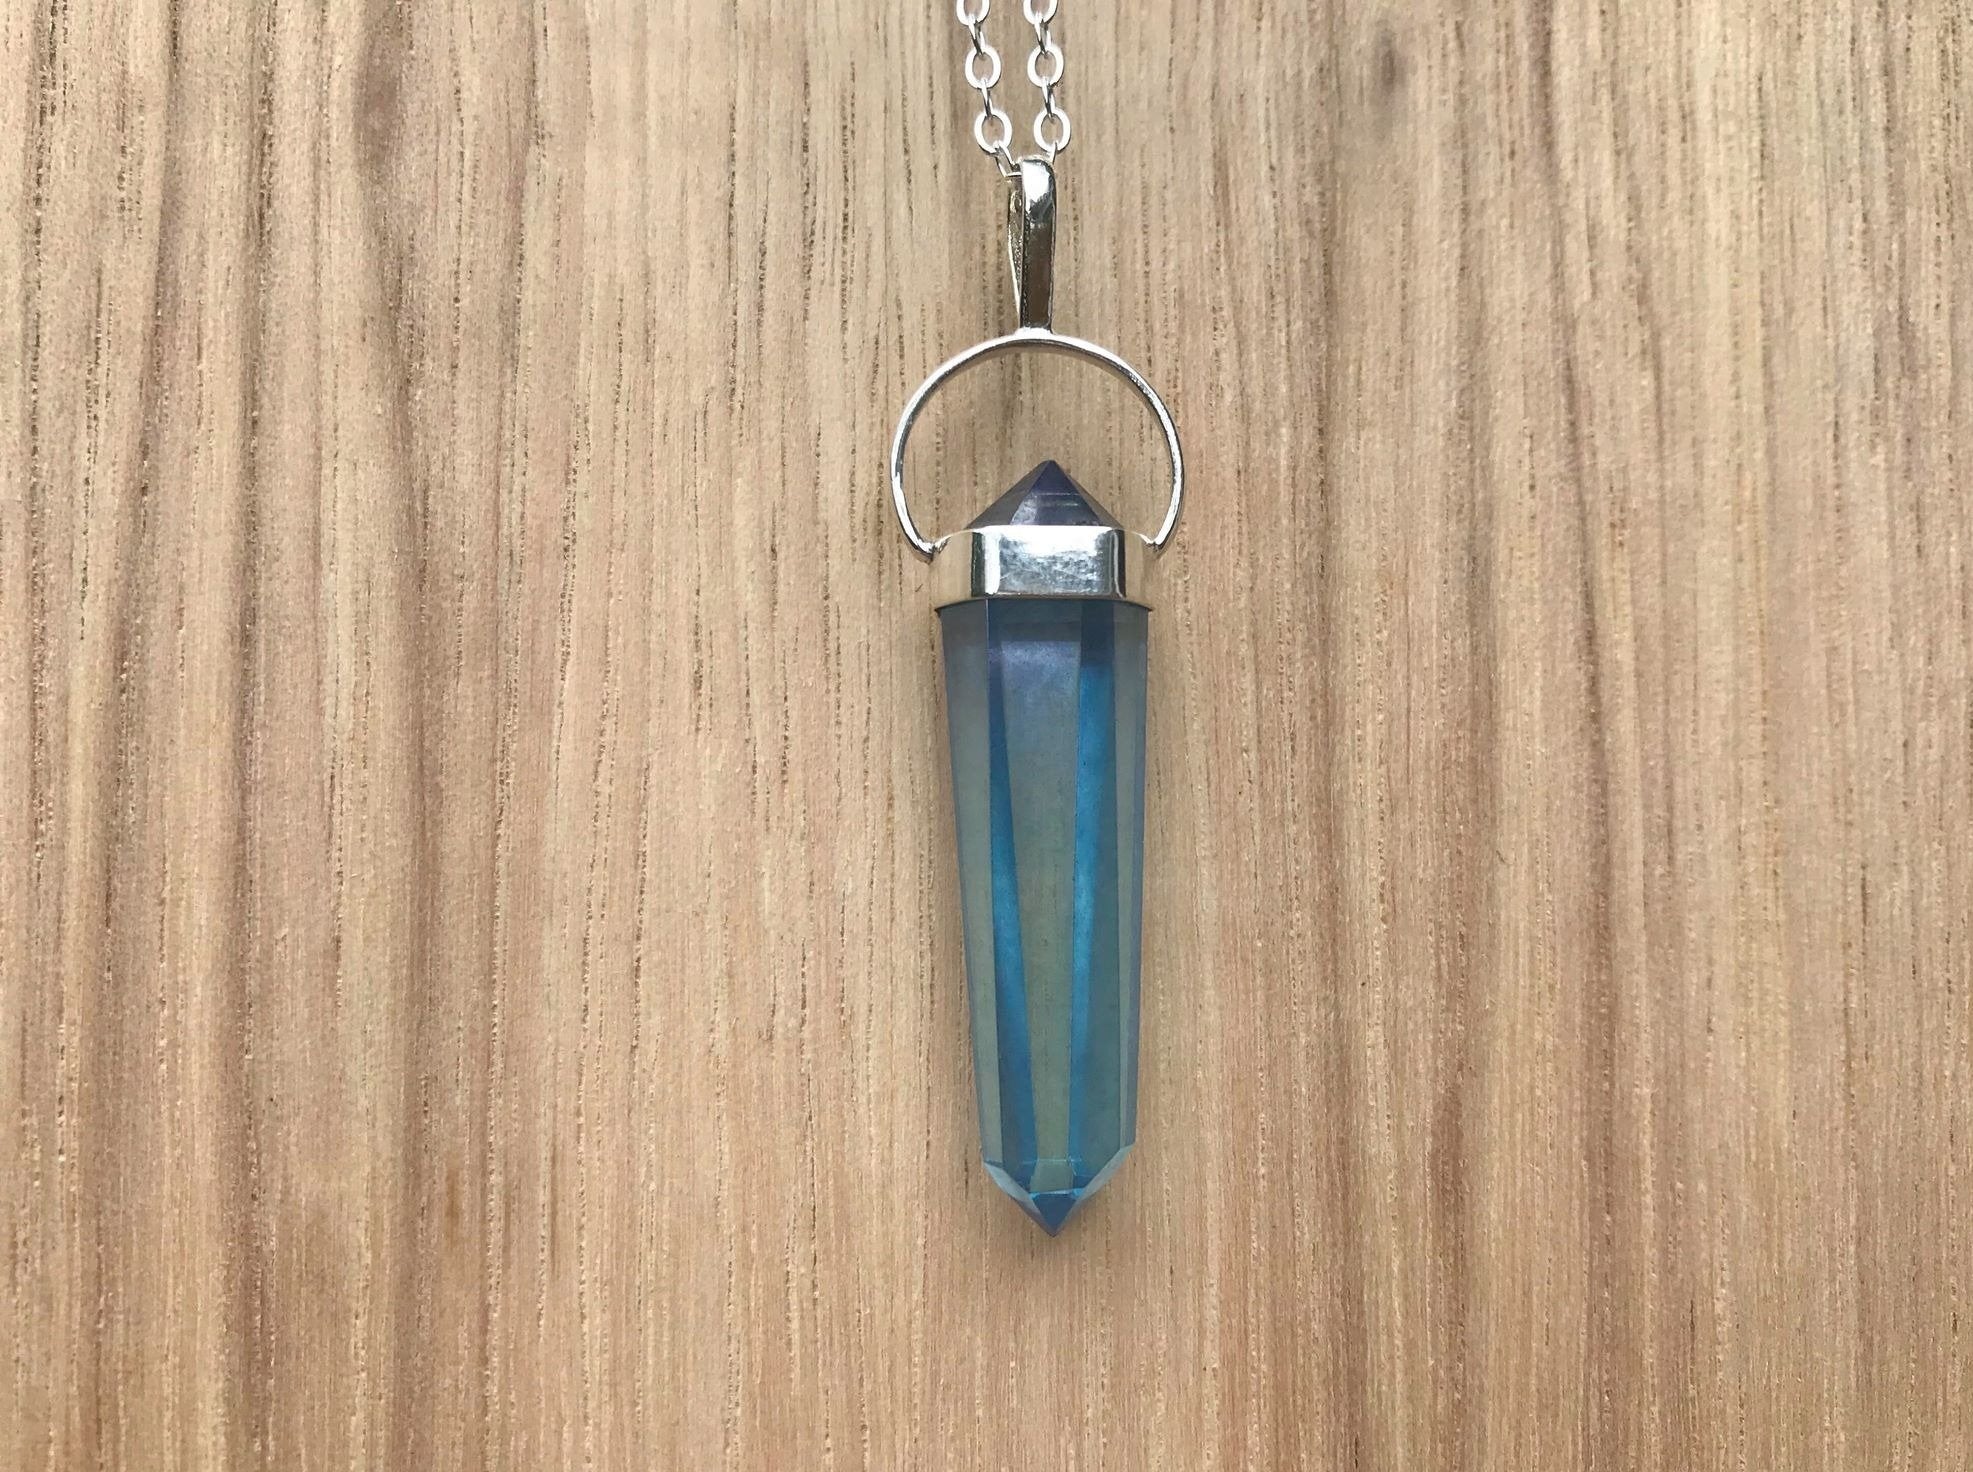 SHE'S ☆ THE ☆ RAINBOW on Instagram: “the AQUA AURA Quartz choker. paired  with the cuban link chain ~ … | Aqua aura quartz, Aqua aura quartz necklaces,  Quartz choker